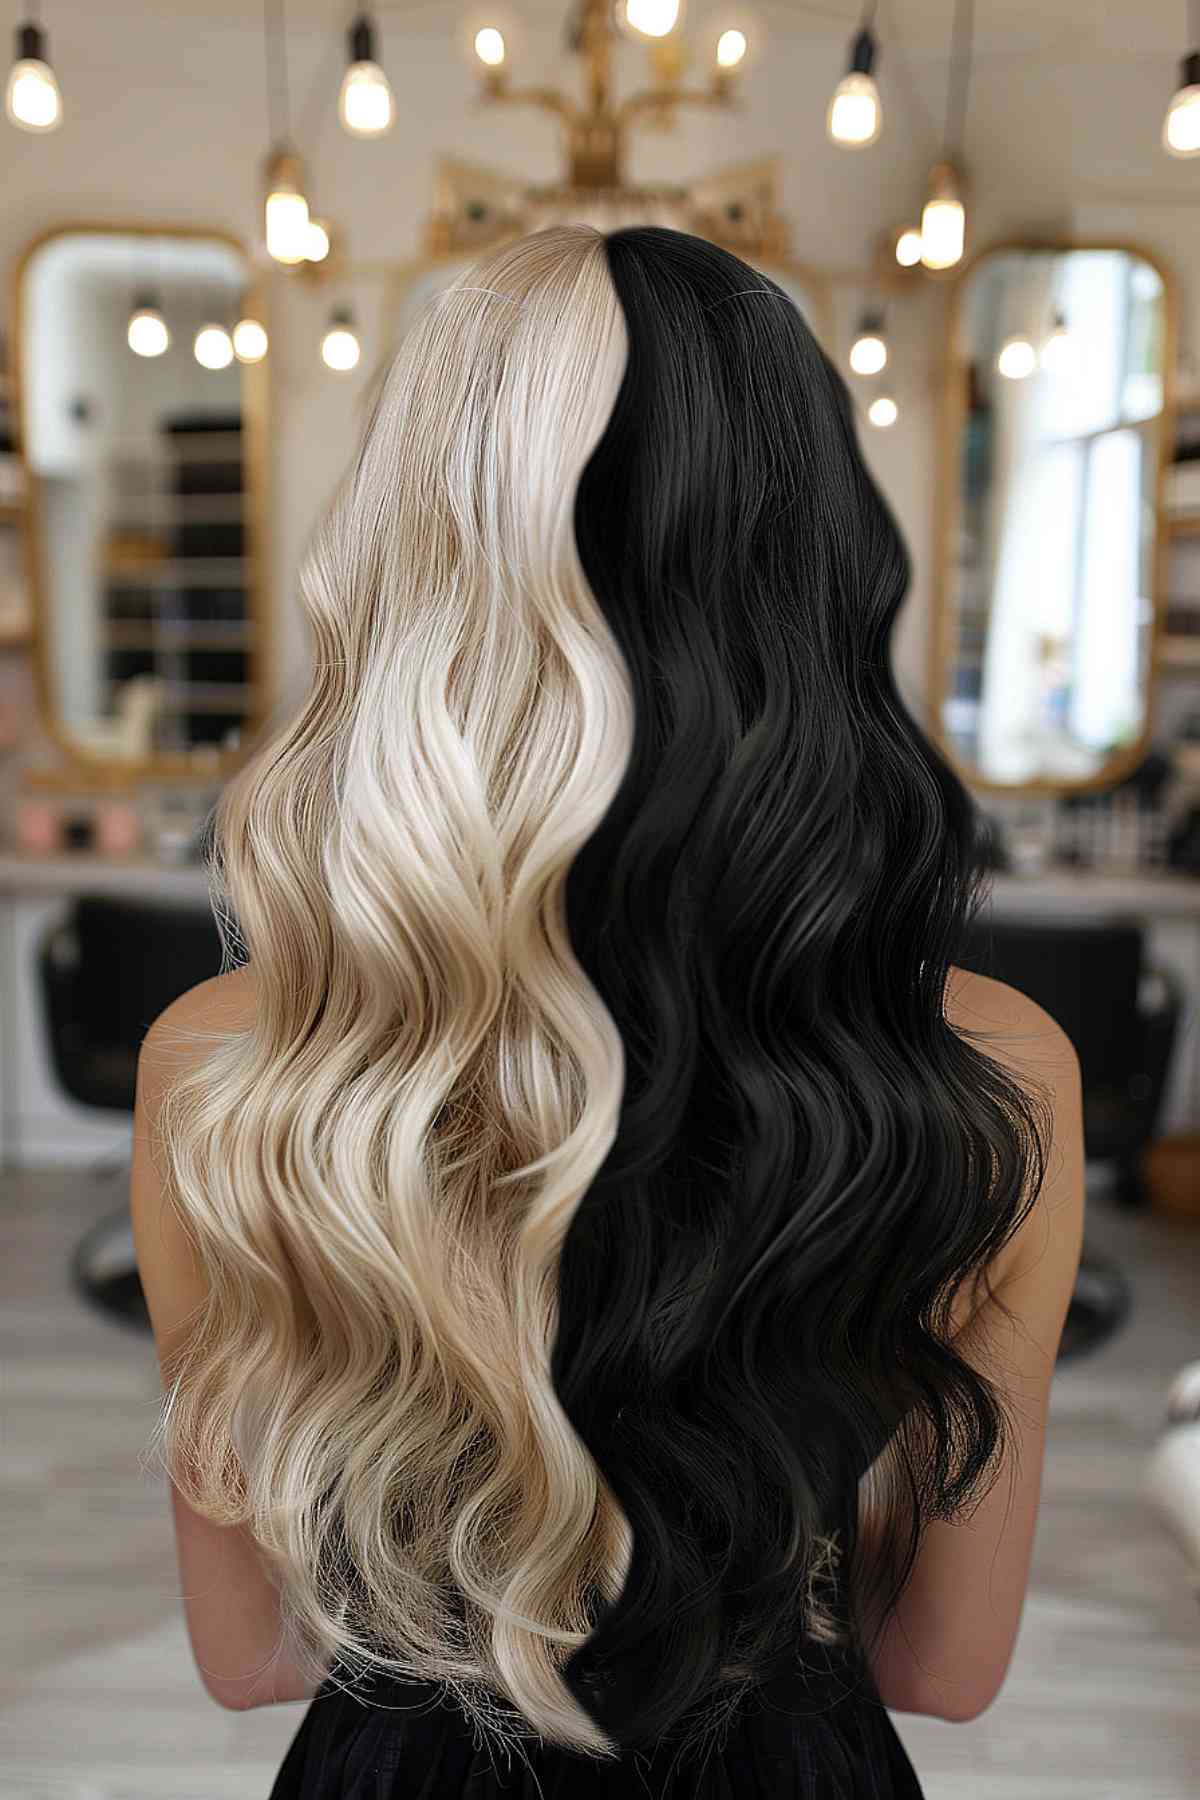 Waist-length black and blonde two-toned hair, ideal for creating contrast and complementing angular features.